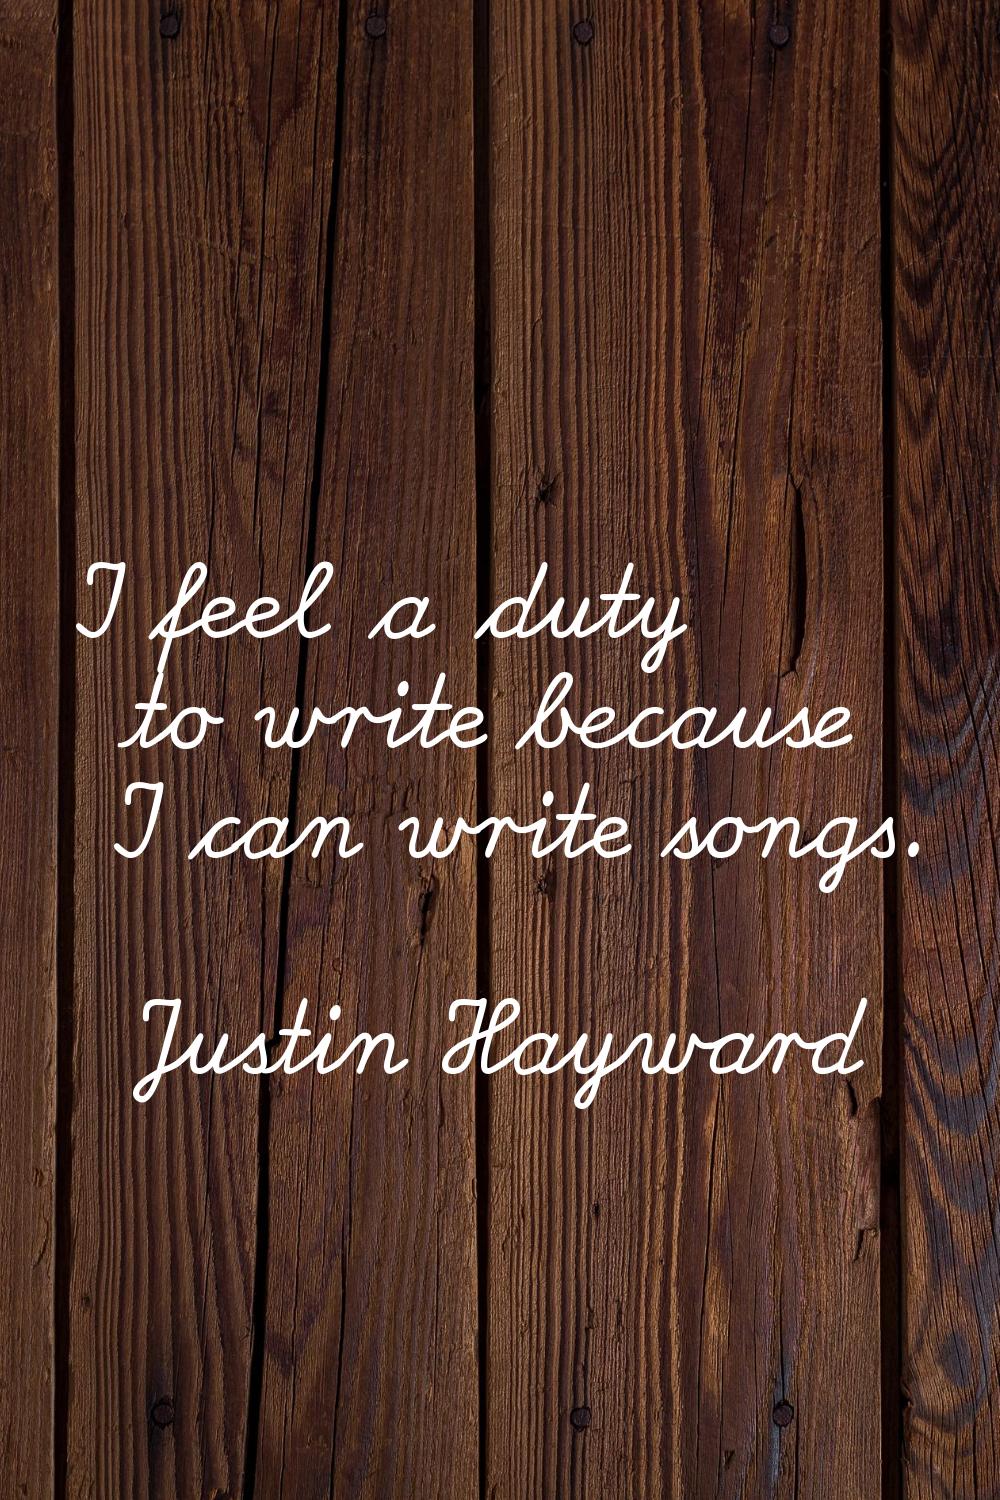 I feel a duty to write because I can write songs.